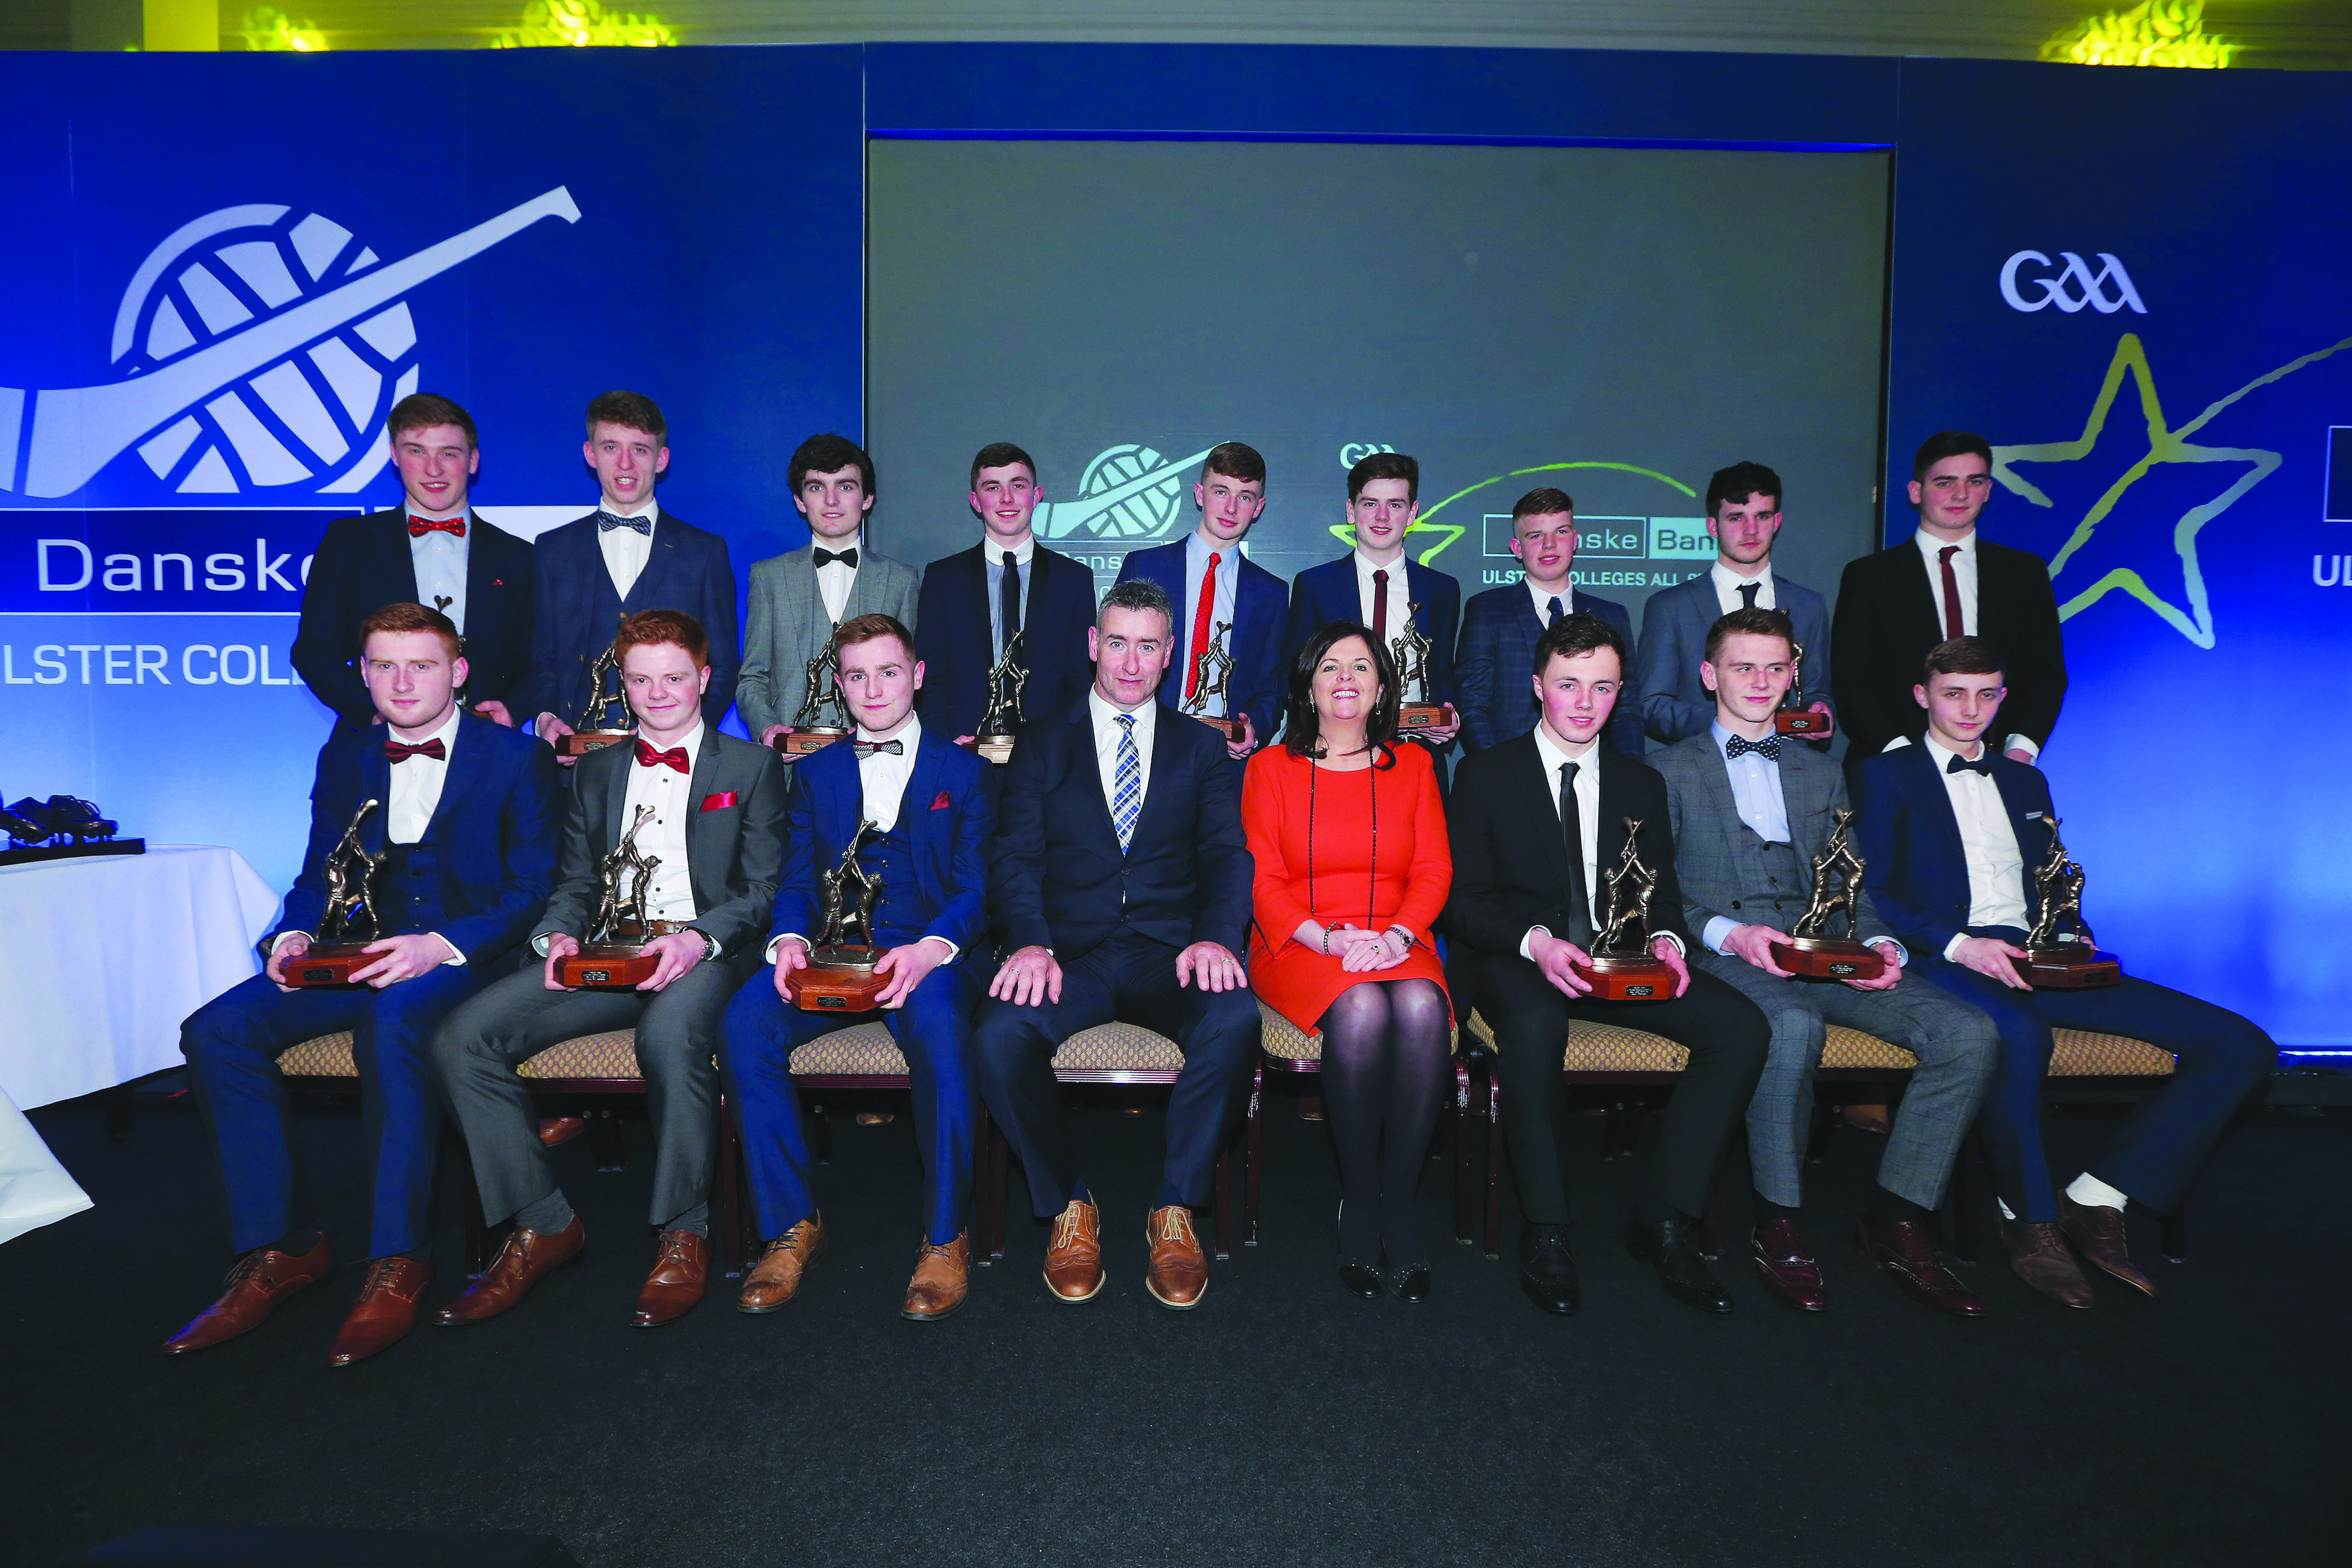 The 2016 Ulster Colleges All-Star team includes local lads Conor Carson (St Mary’s, back row fourth from left), Ronan Beatty (St Mary’s, back row middle), Dubaltach Mac Aoidh-Baicéir (Colaiste Feirste, back row third right) and Donal McKernan (Rathmore, front row third right) 